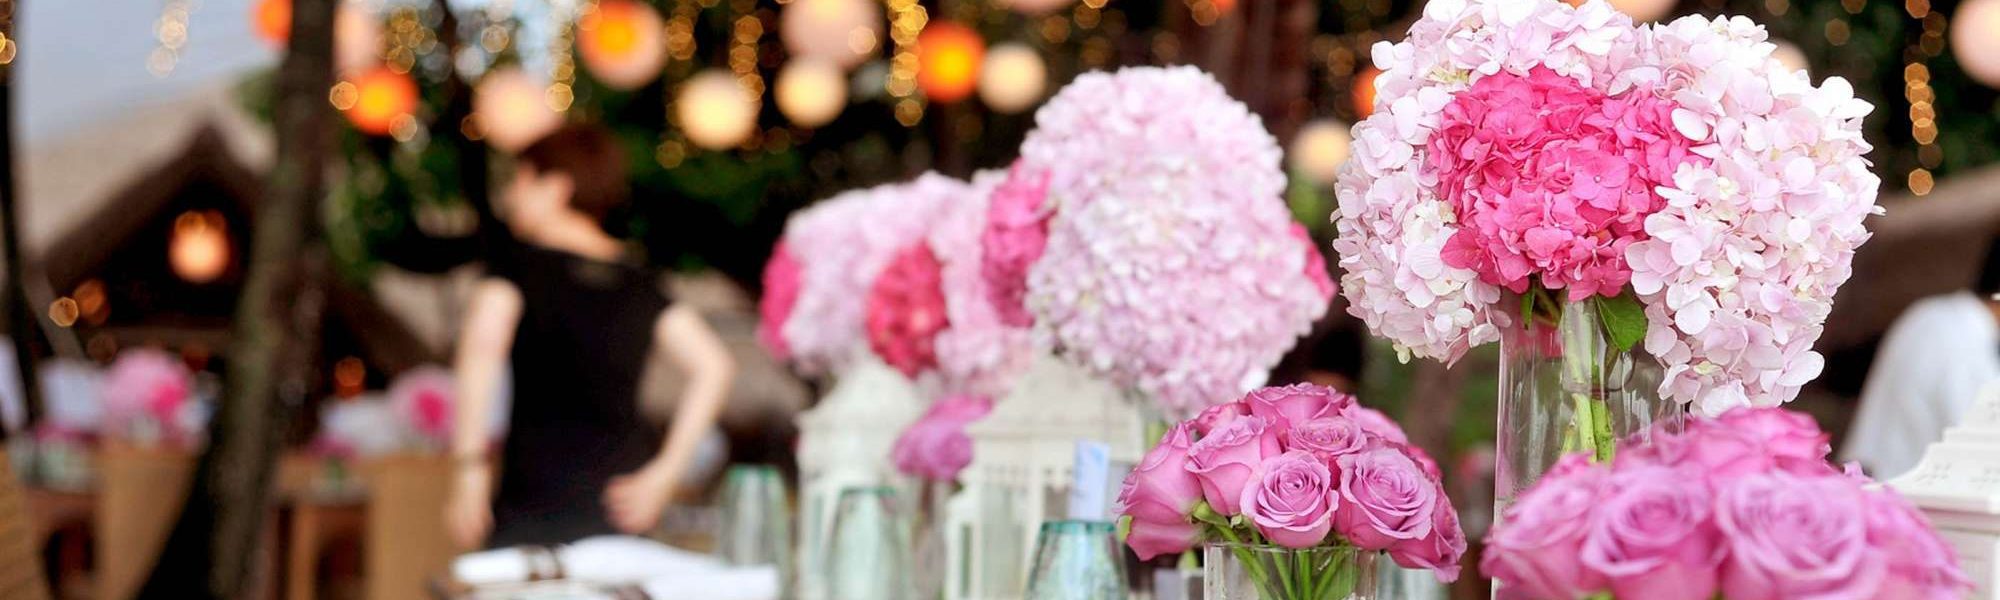 hanging lights floral table centerpieces pink